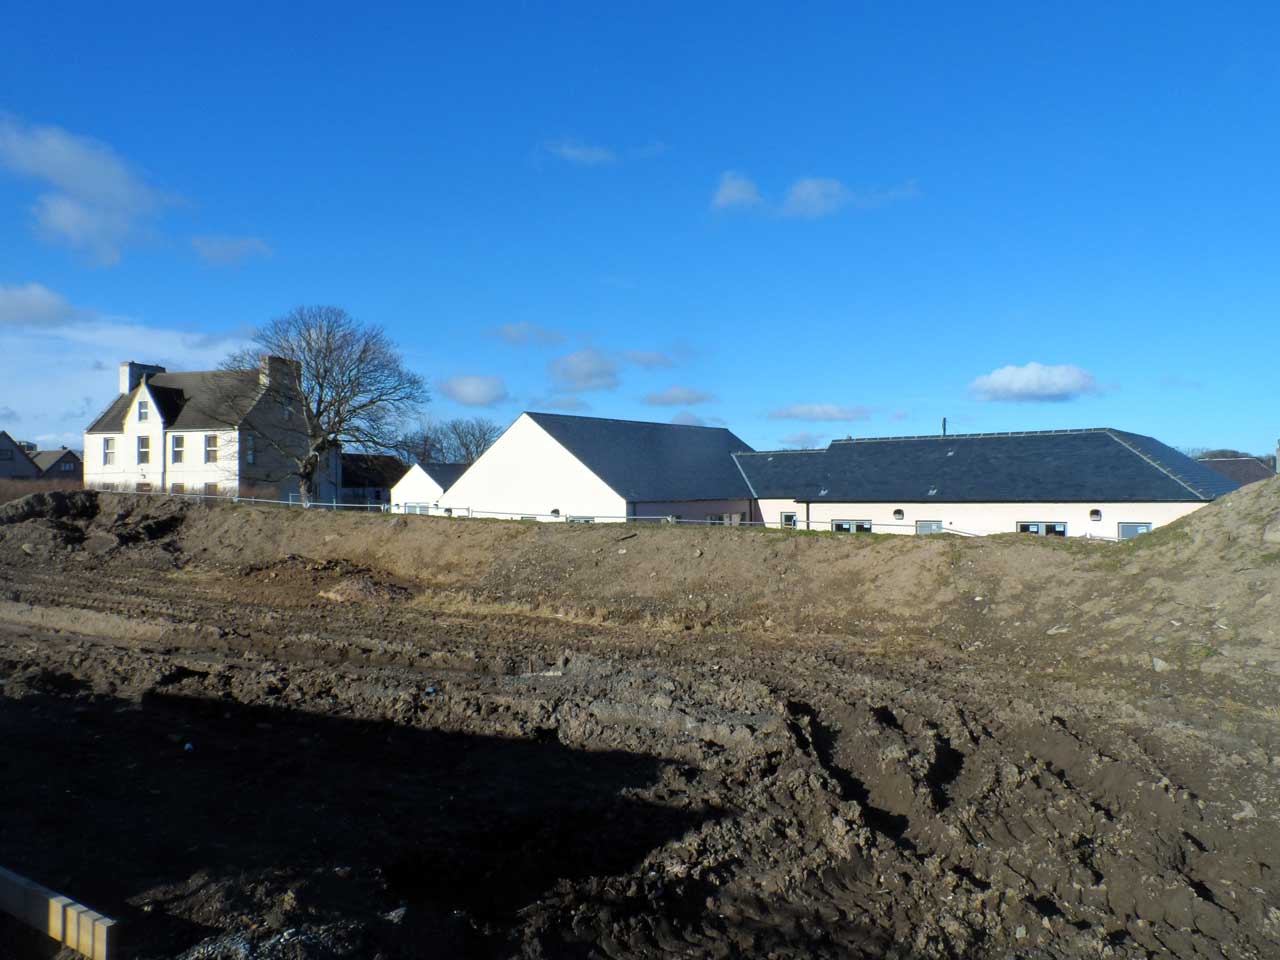 Photo: New Children's Home In Wick 1 March 2014